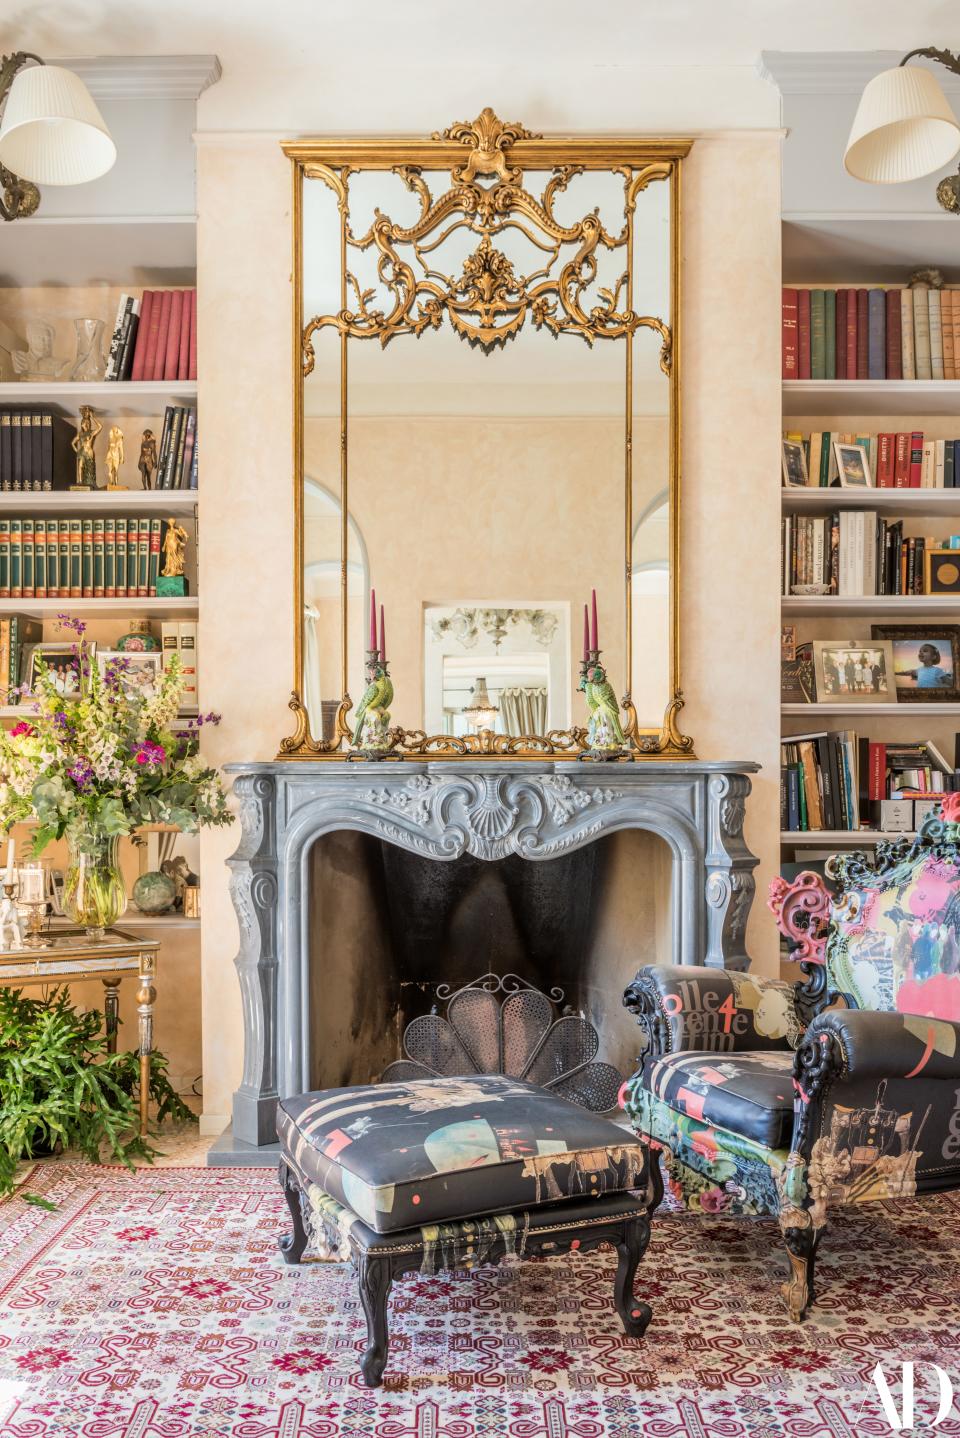 In one of the home’s living rooms, books on art, music, and literature fill the shelves. The brightly colored armchair and ottoman are “Follemente Effimero Opera” by Alberto Bartalini.